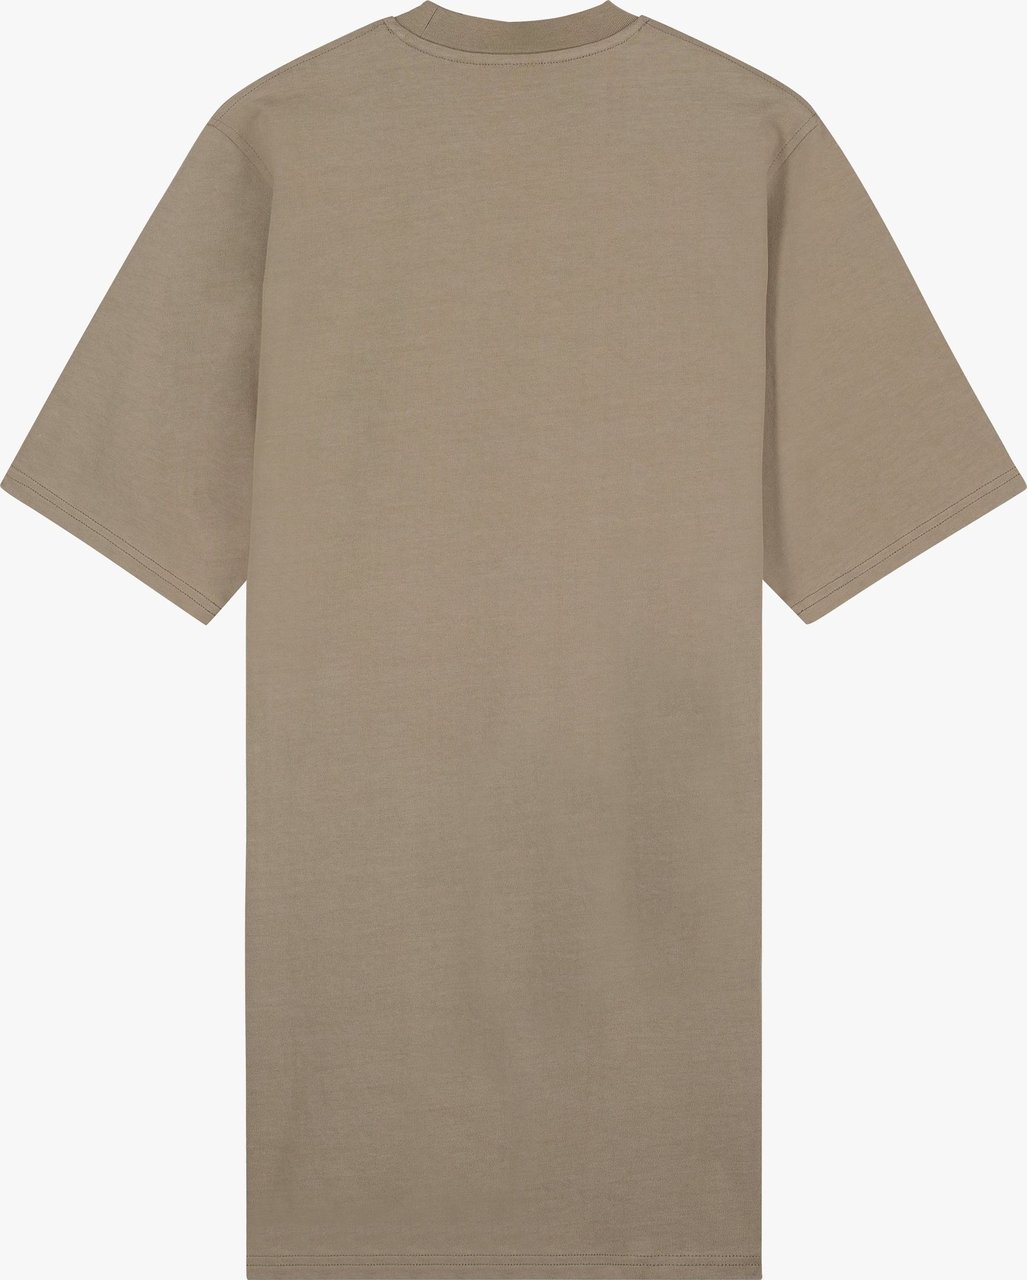 Malelions Harper T-Shirt Dress - Taupe Taupe